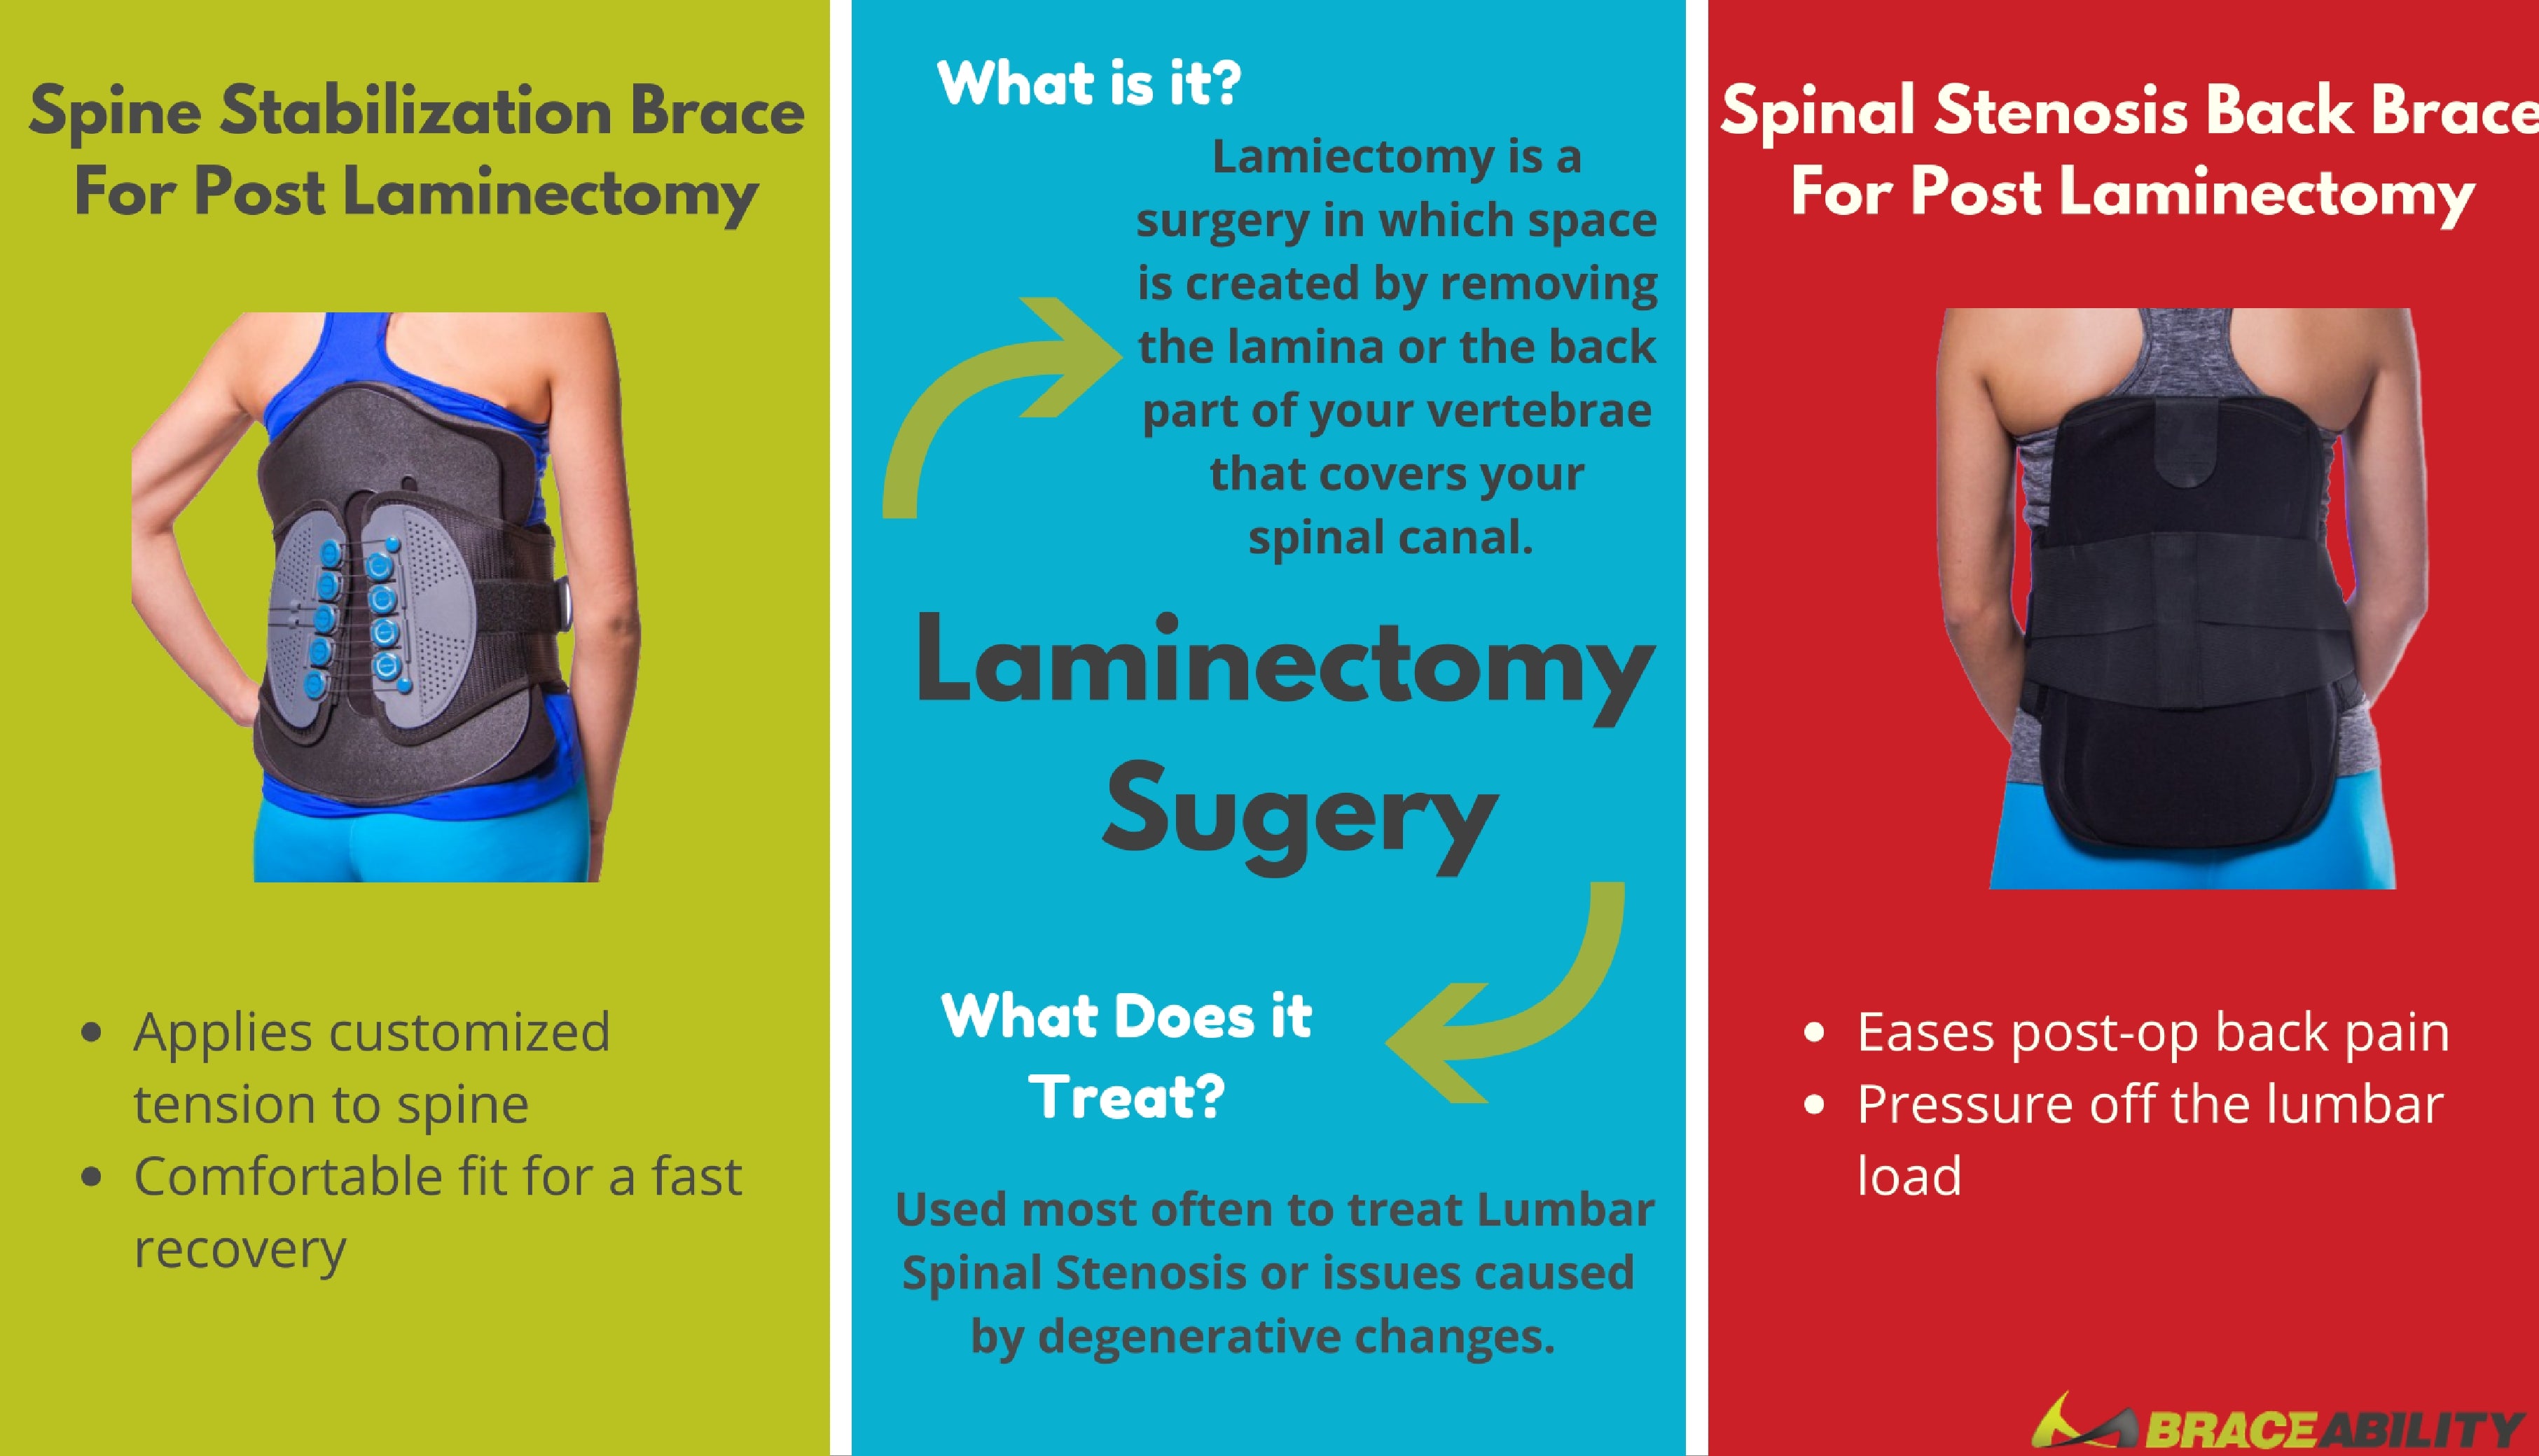 Best treatment option for after lumbar laminectomy surgery